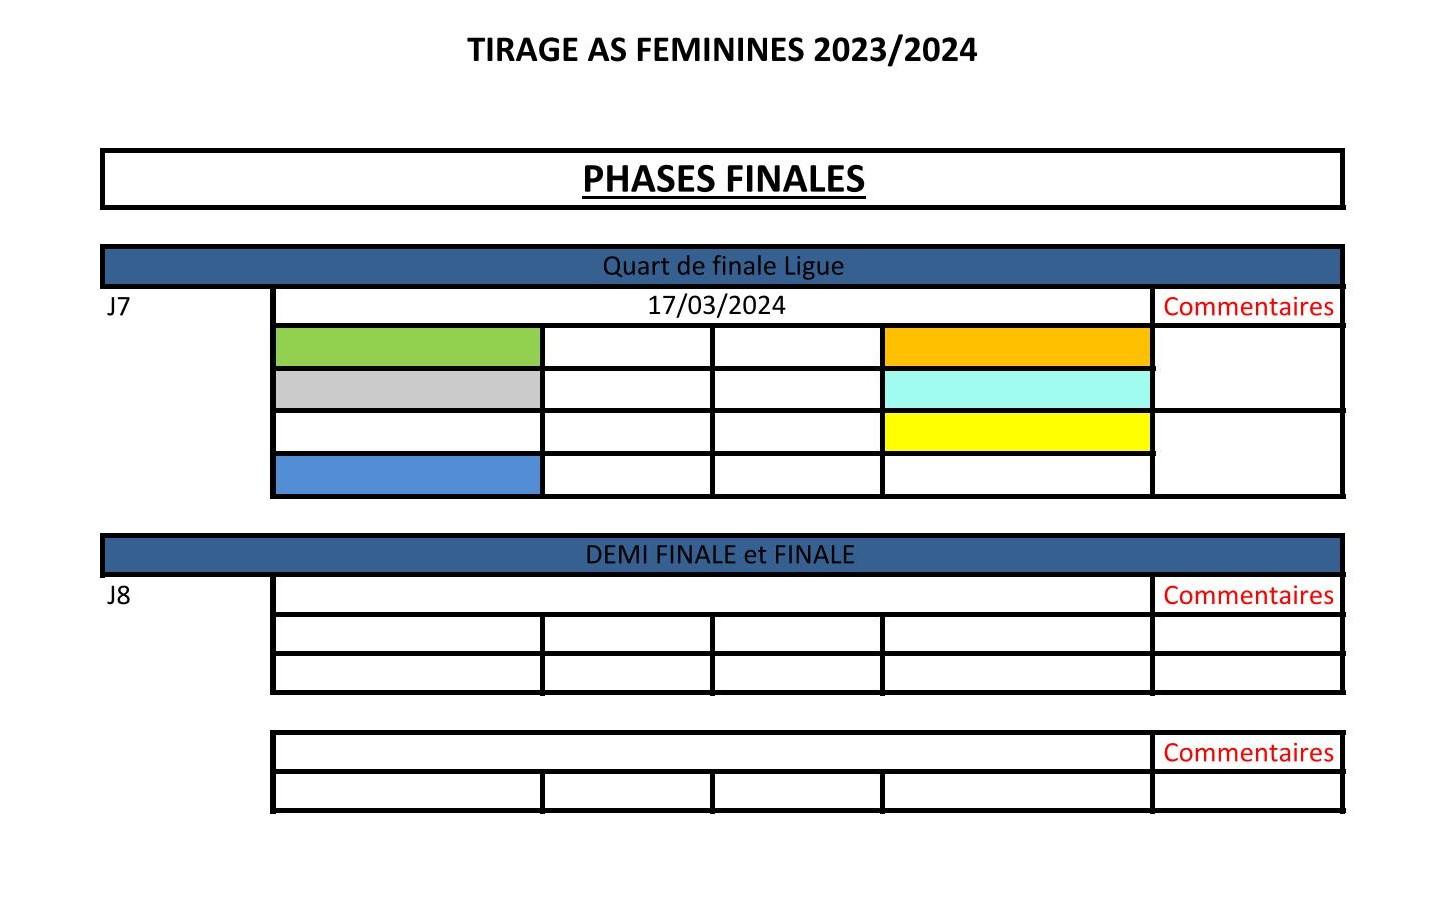 Phases finales 2023/2024